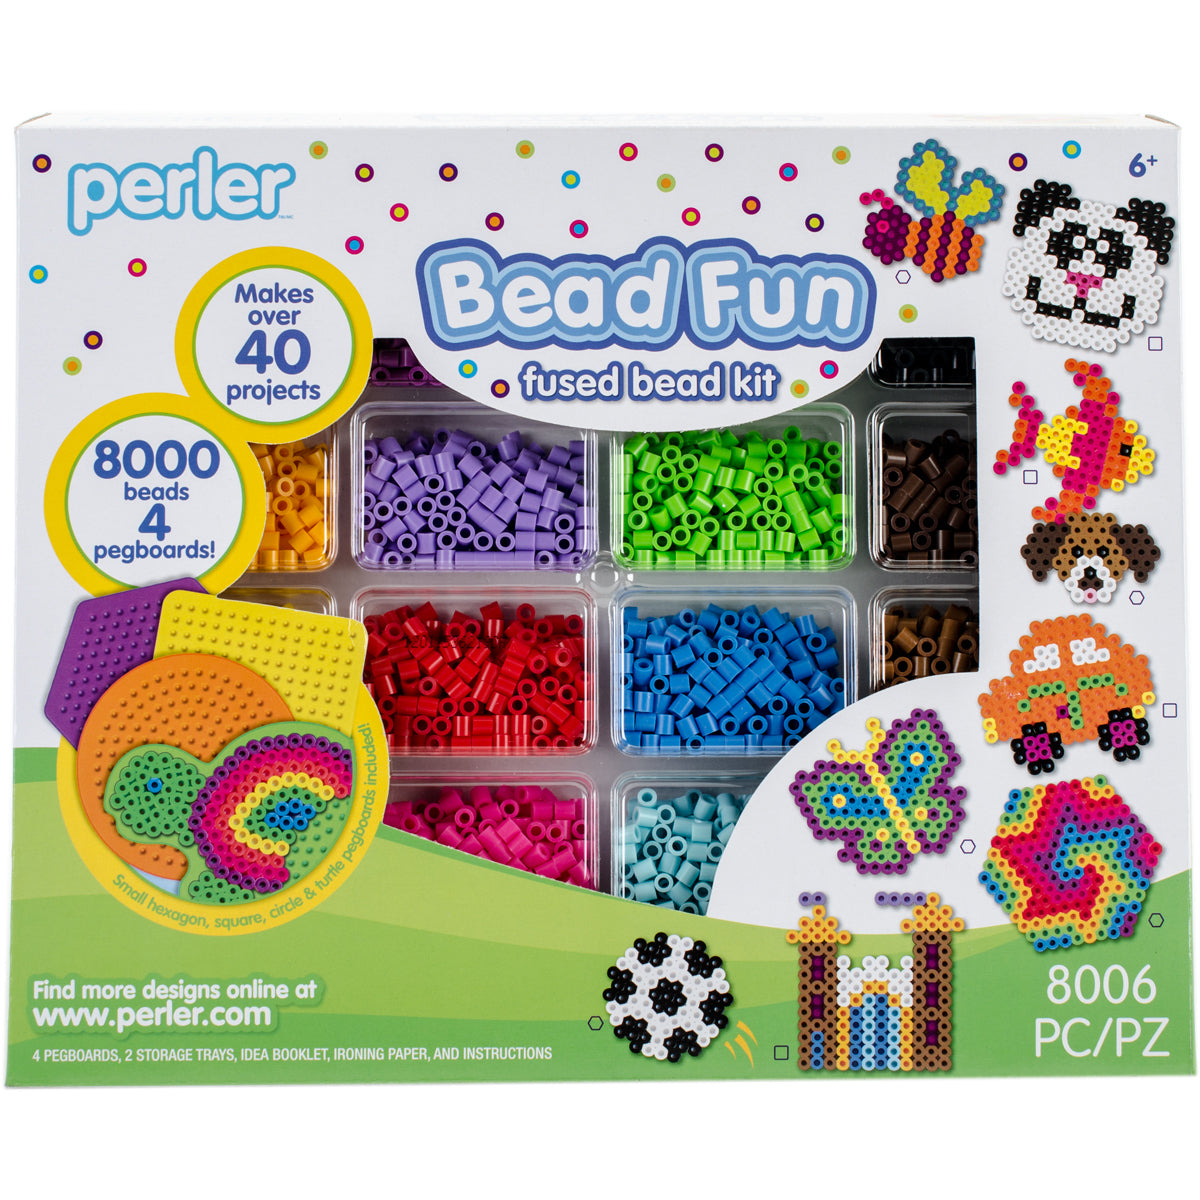 PERLER BEAD N LEARN PUZZLE KITS INCLUDING STORAGE POUCH